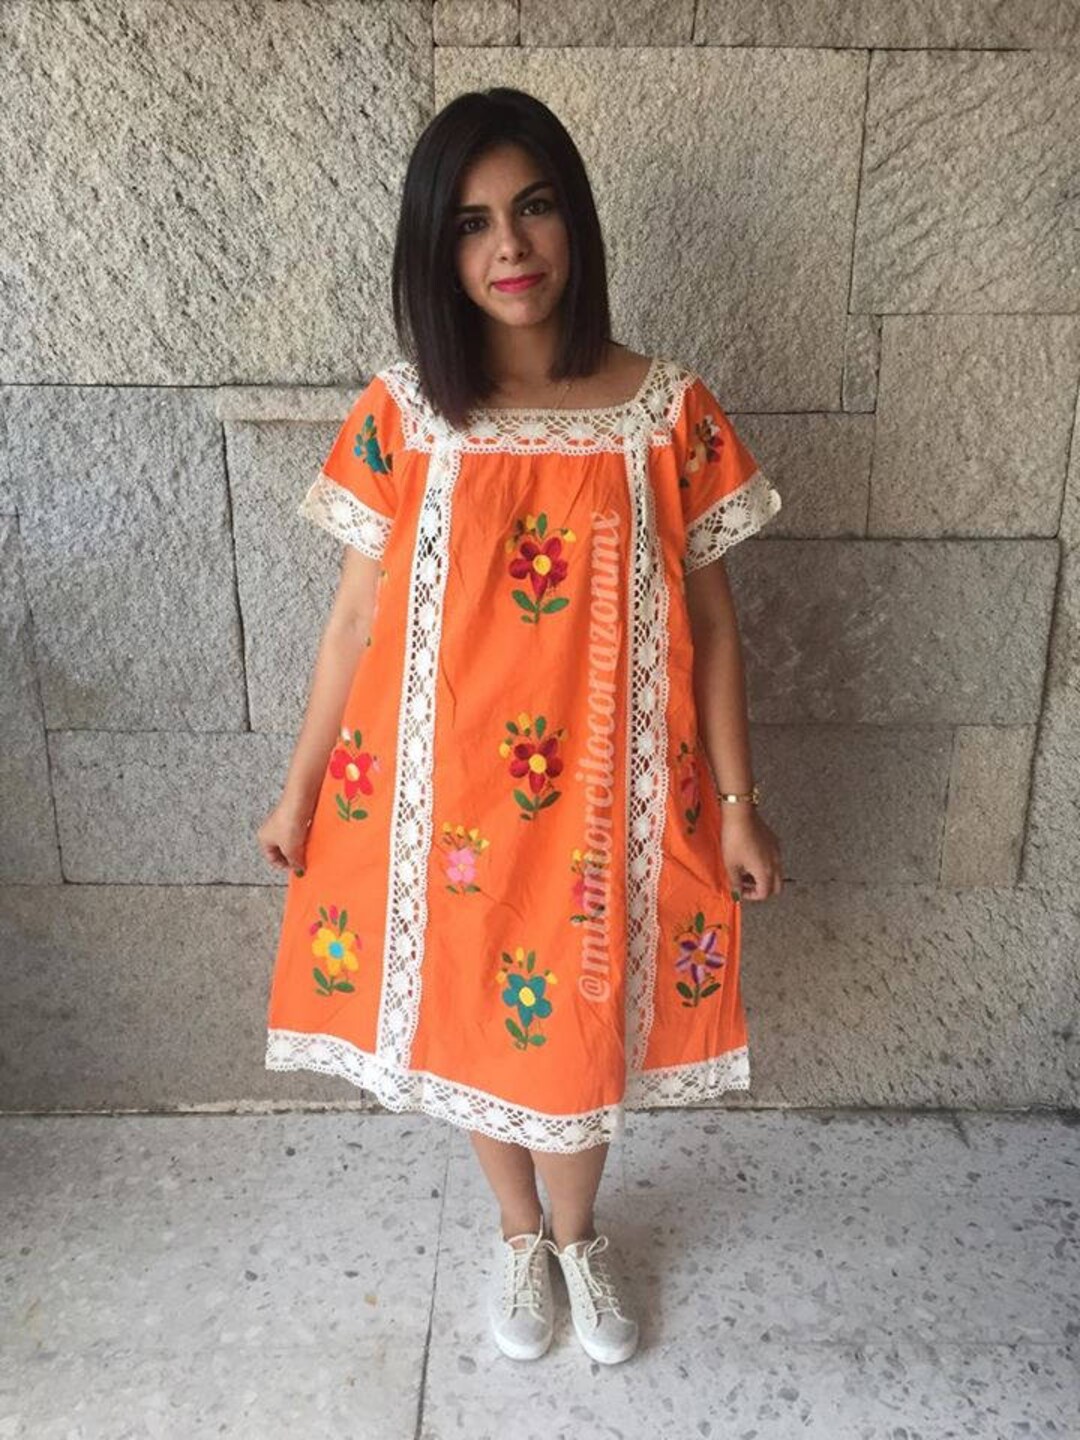 Orange Vintage Mexican Dress 90s Mexican Tunic Floral - Etsy